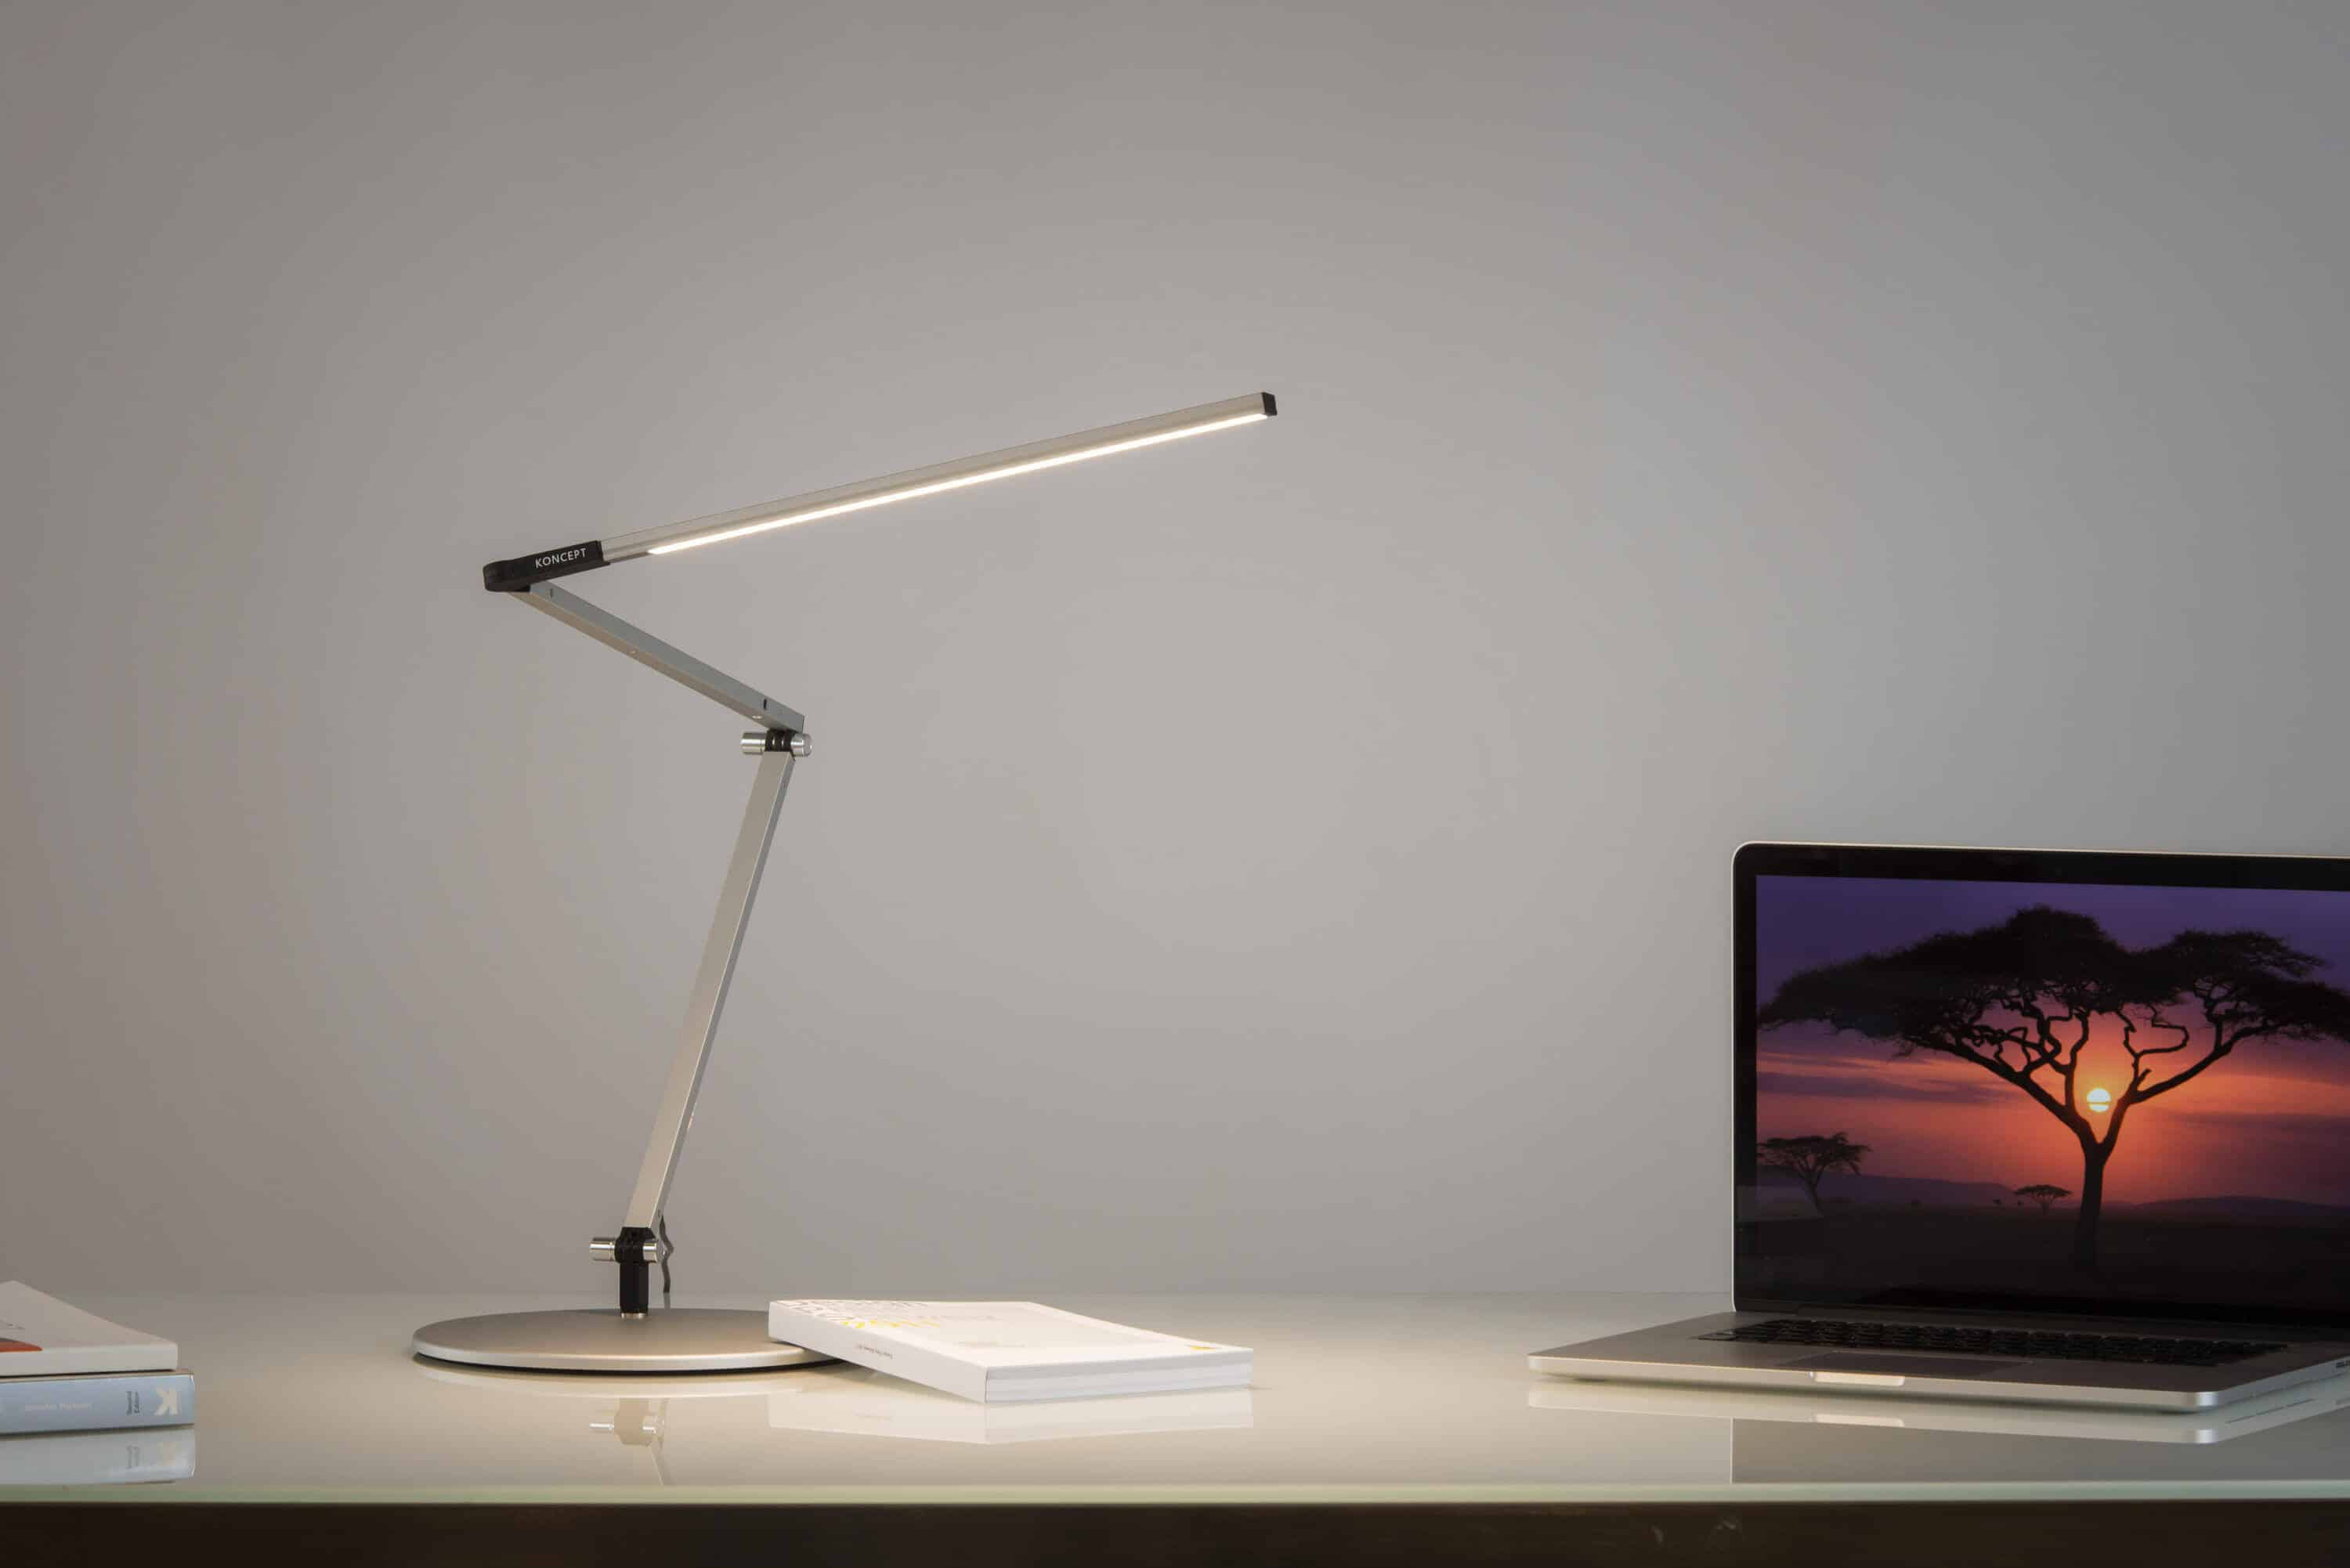 The Best Led Desk Lamps Of 2019 Reactual within dimensions 3000 X 2002